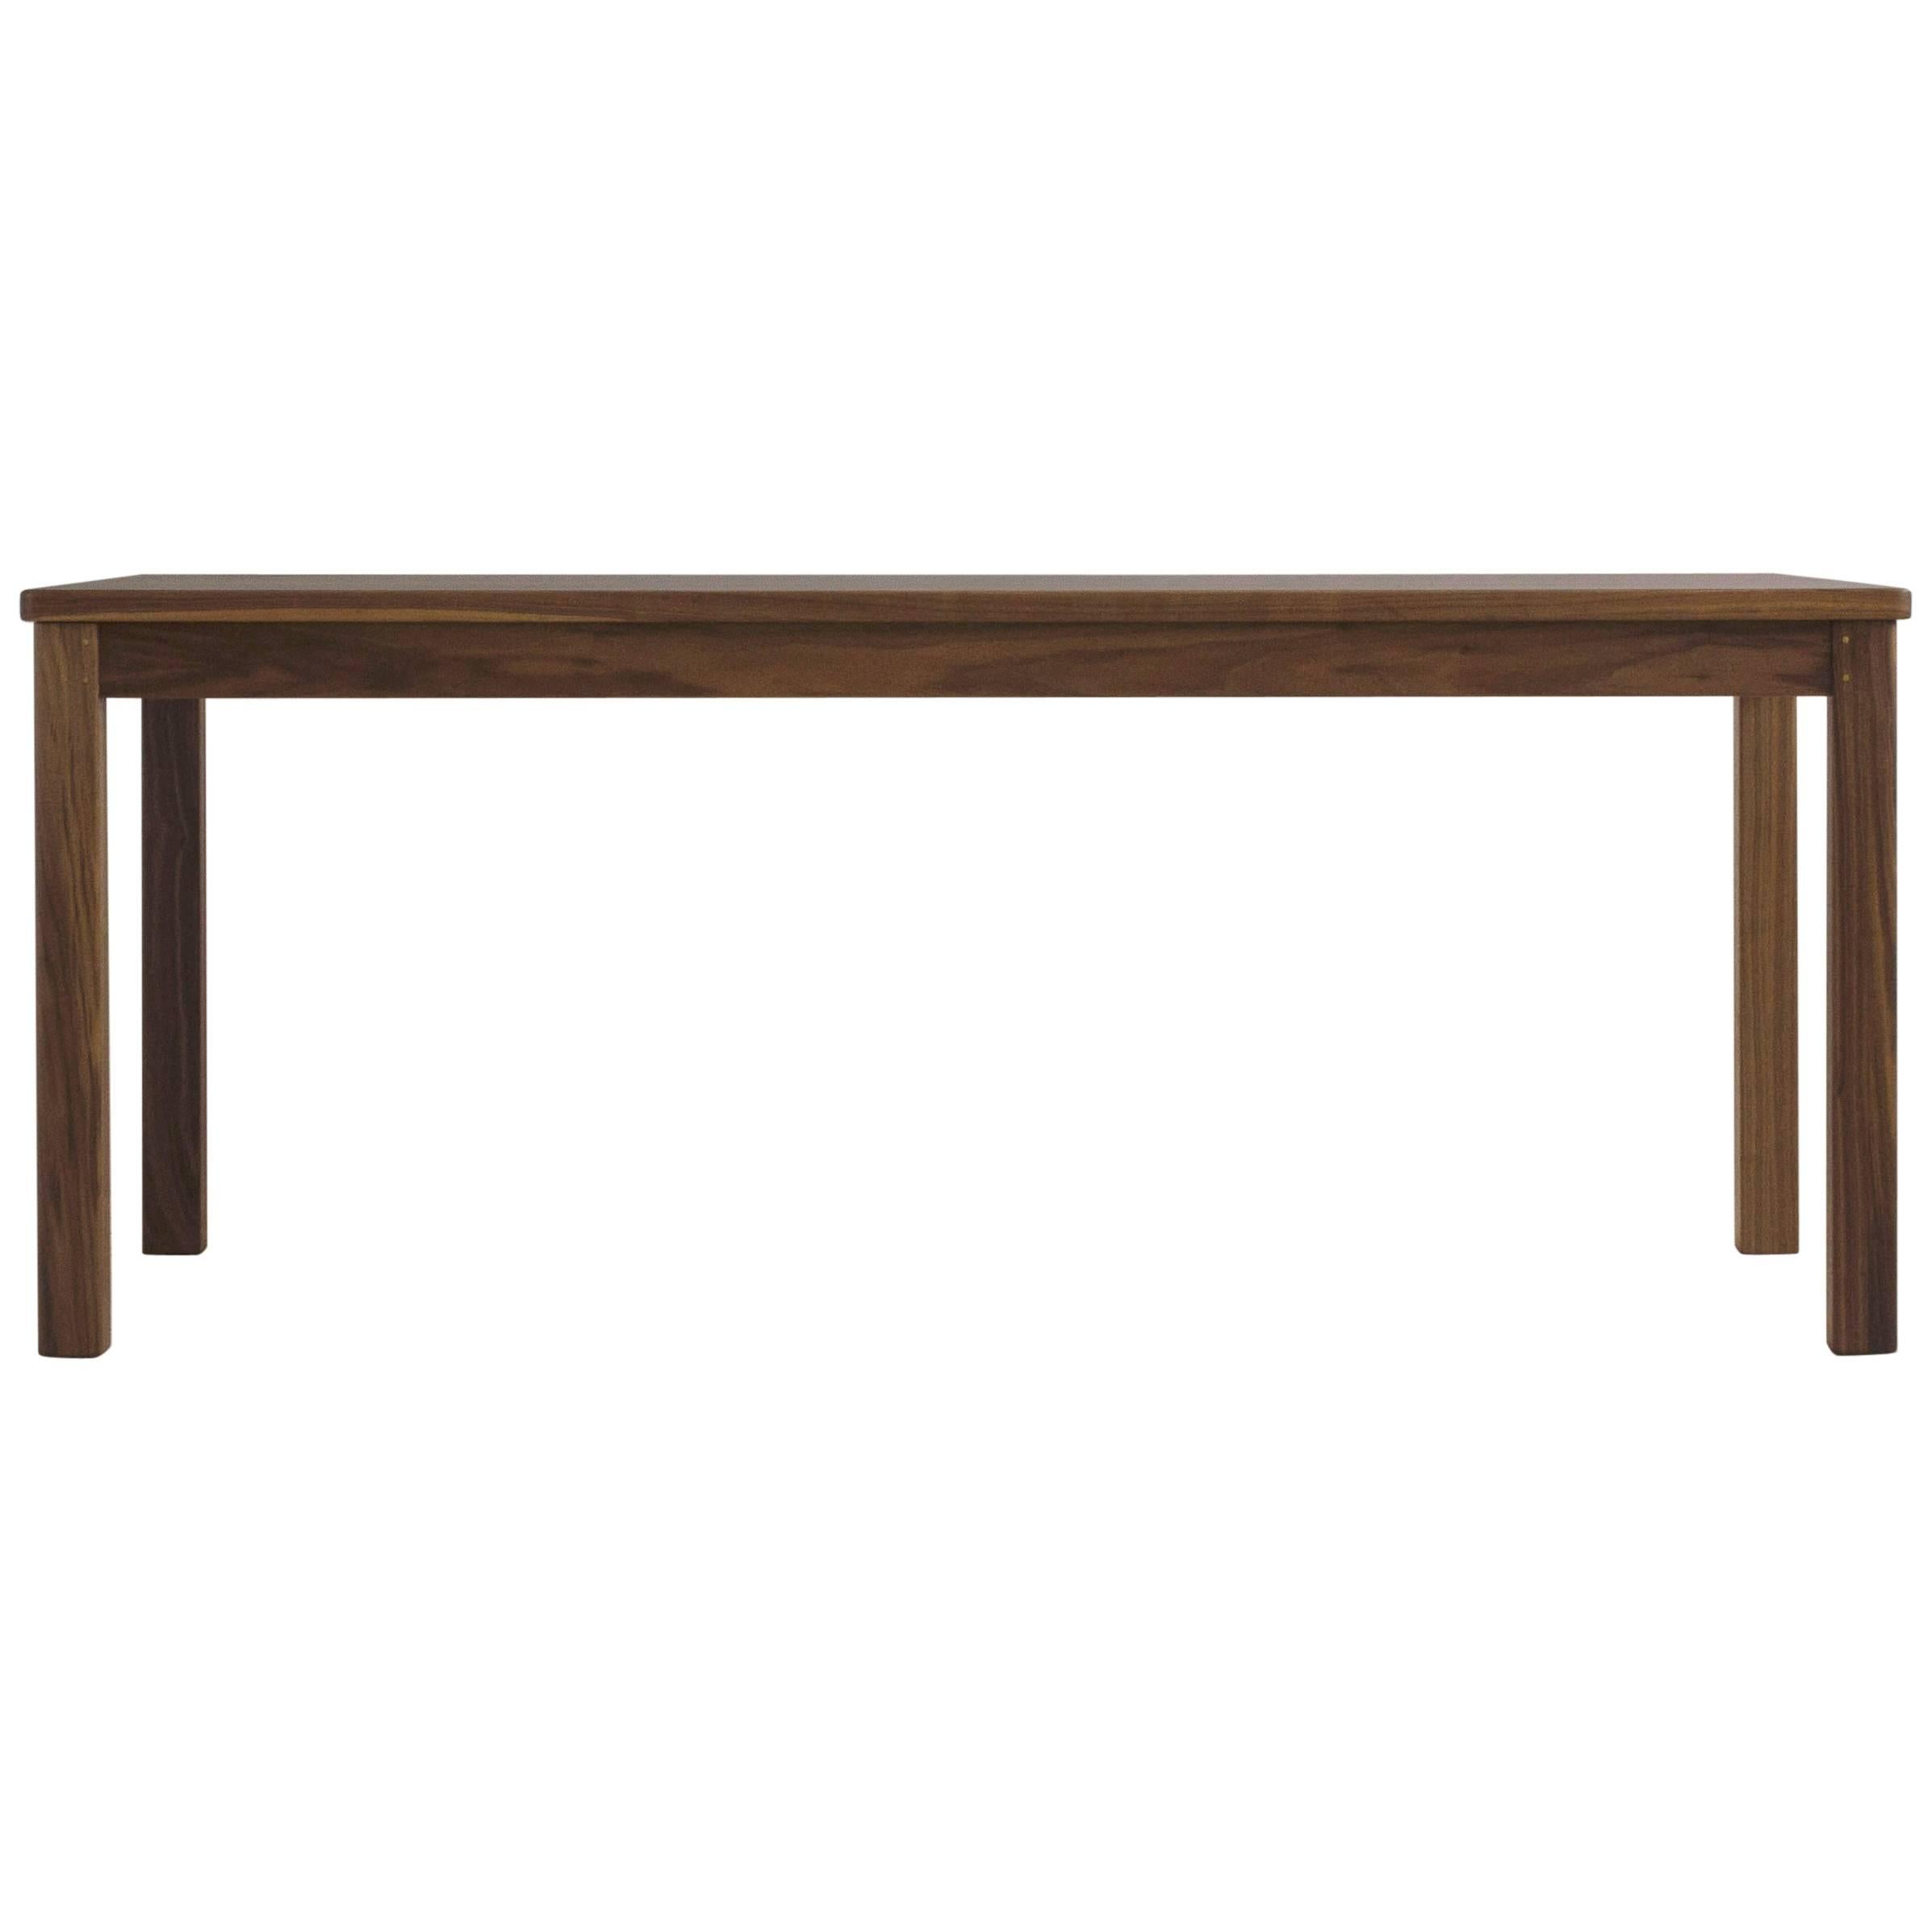 Small "Lore" Dining Table, Solid-Wood, Black Walnut, Modern Shaker-Style For Sale